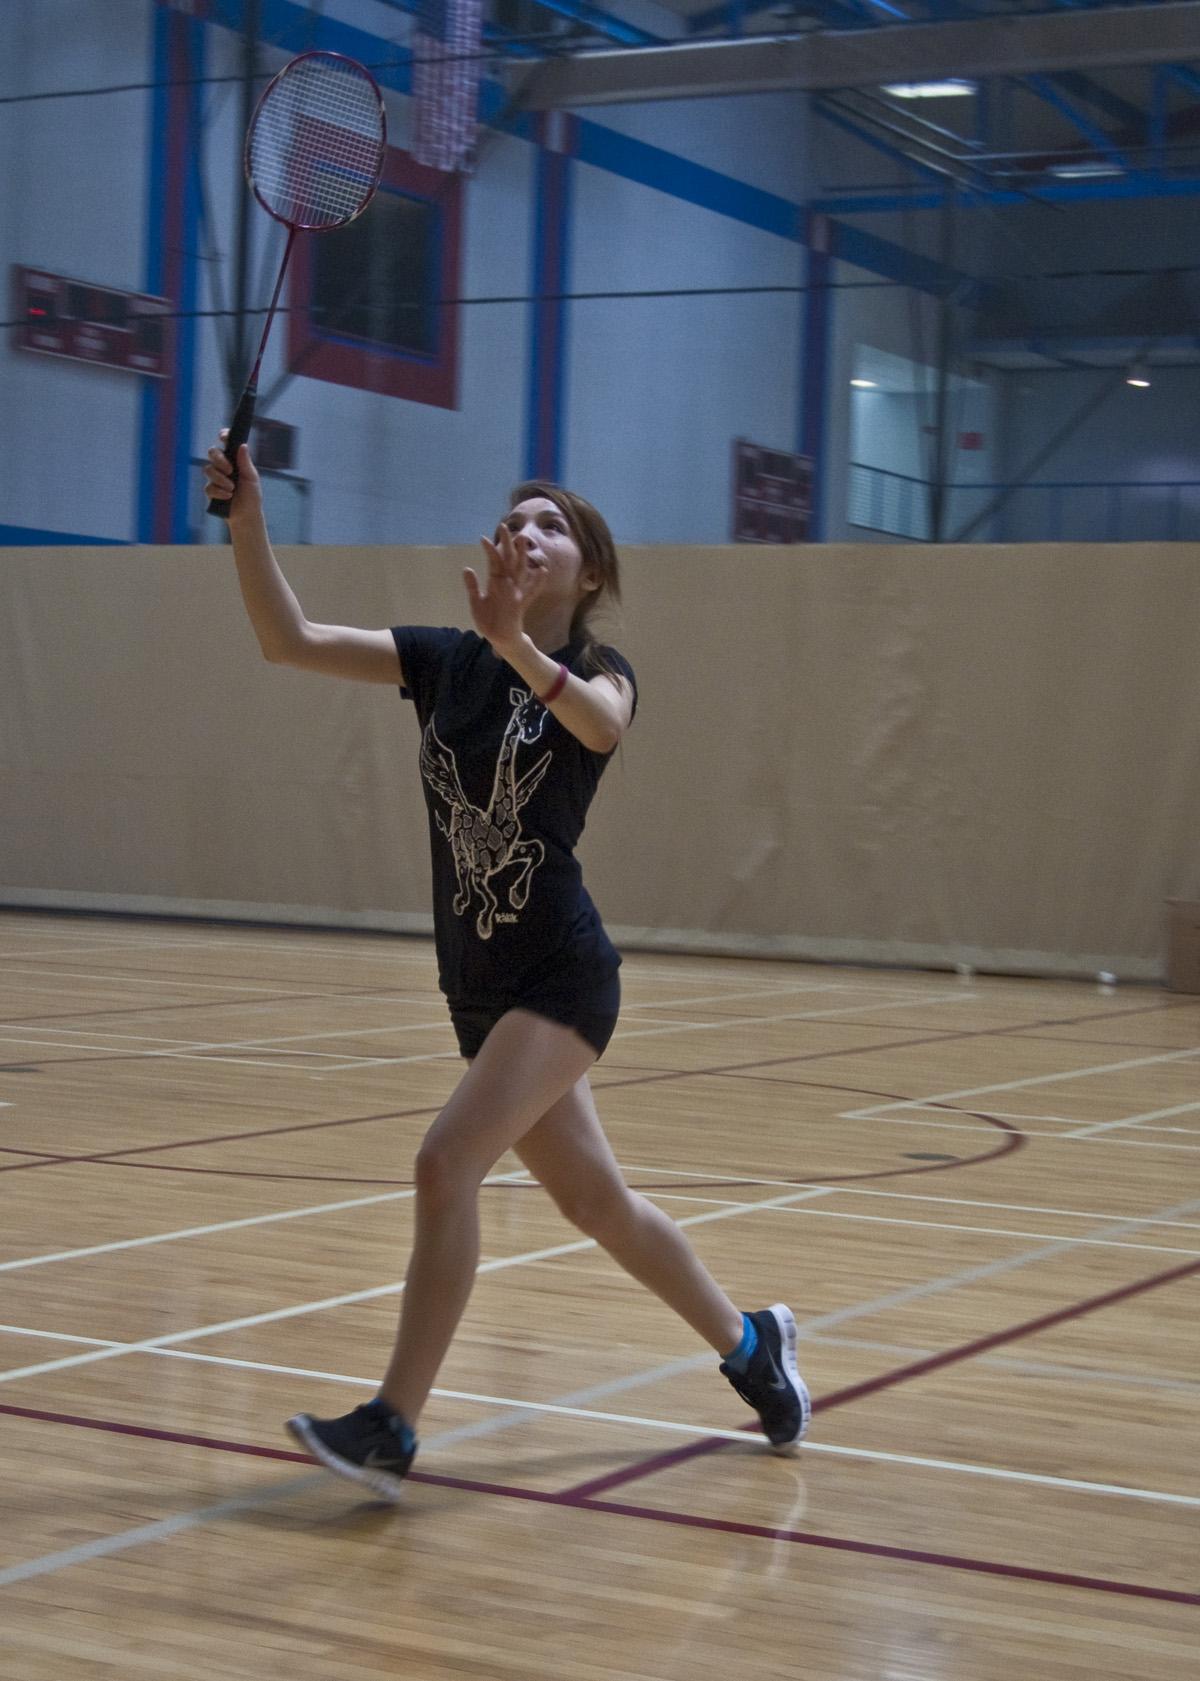 Player from the womens badminton team goes for the birdie during practice April 11 at the Harry West Gym. Audrey Brewer, City Times